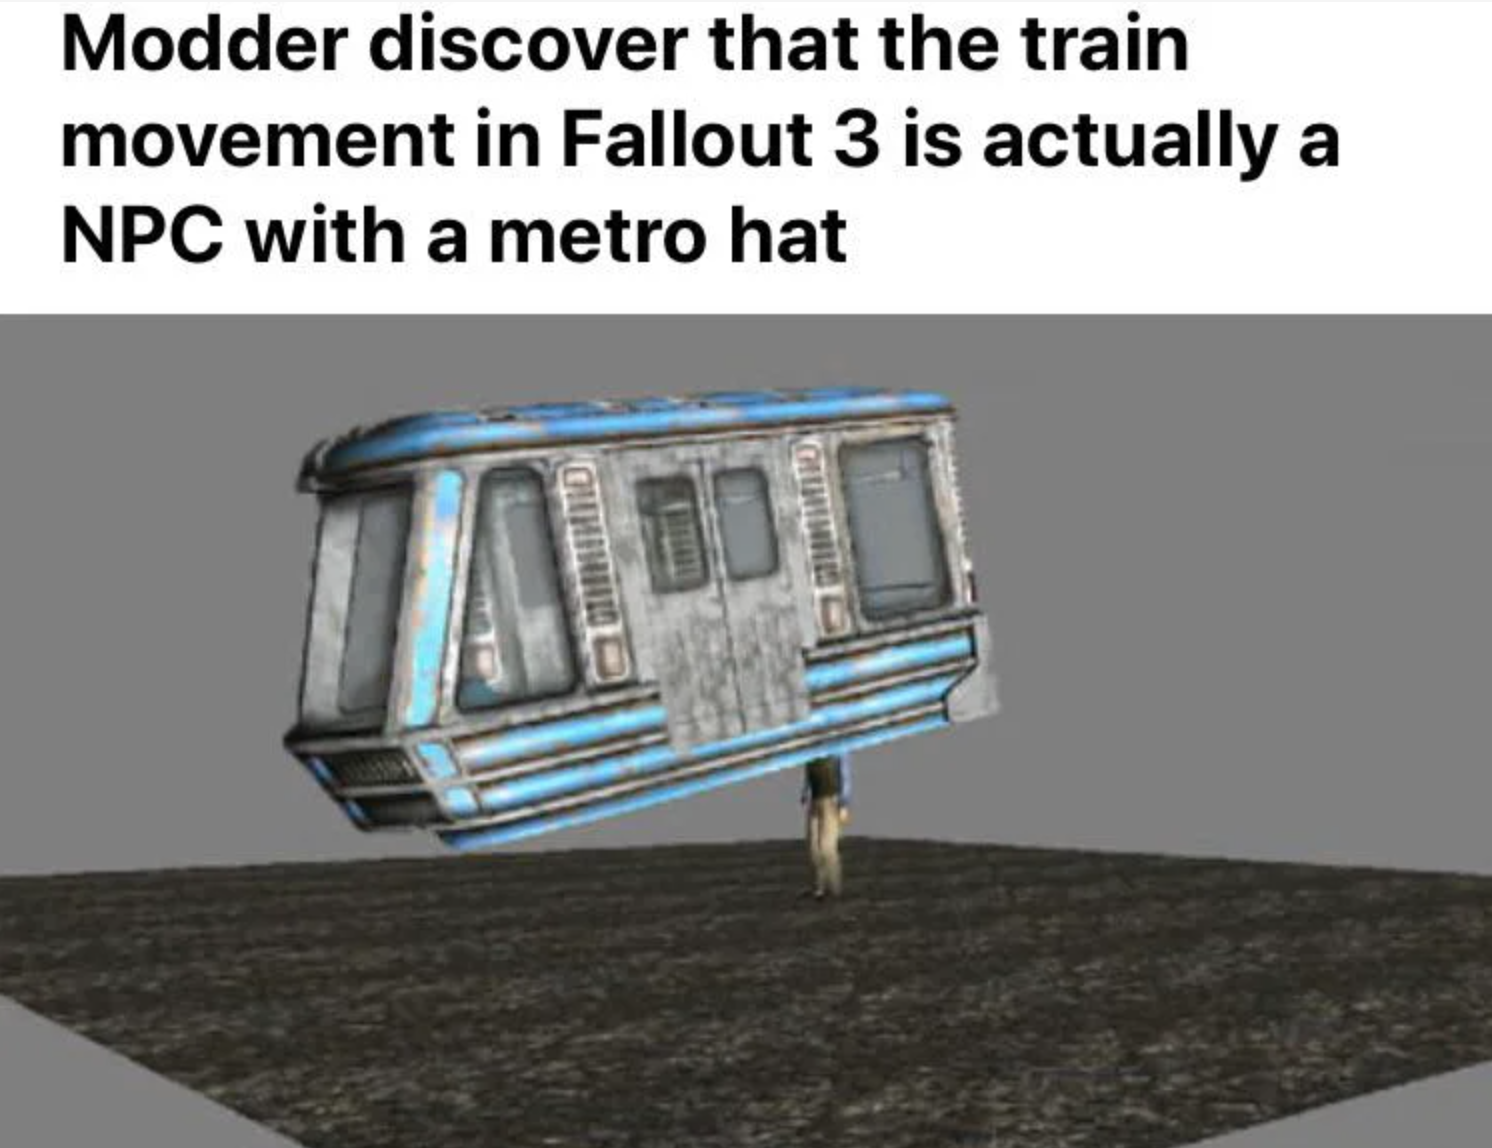 funny gaming memes - vehicle - Modder discover that the train movement in Fallout 3 is actually a Npc with a metro hat